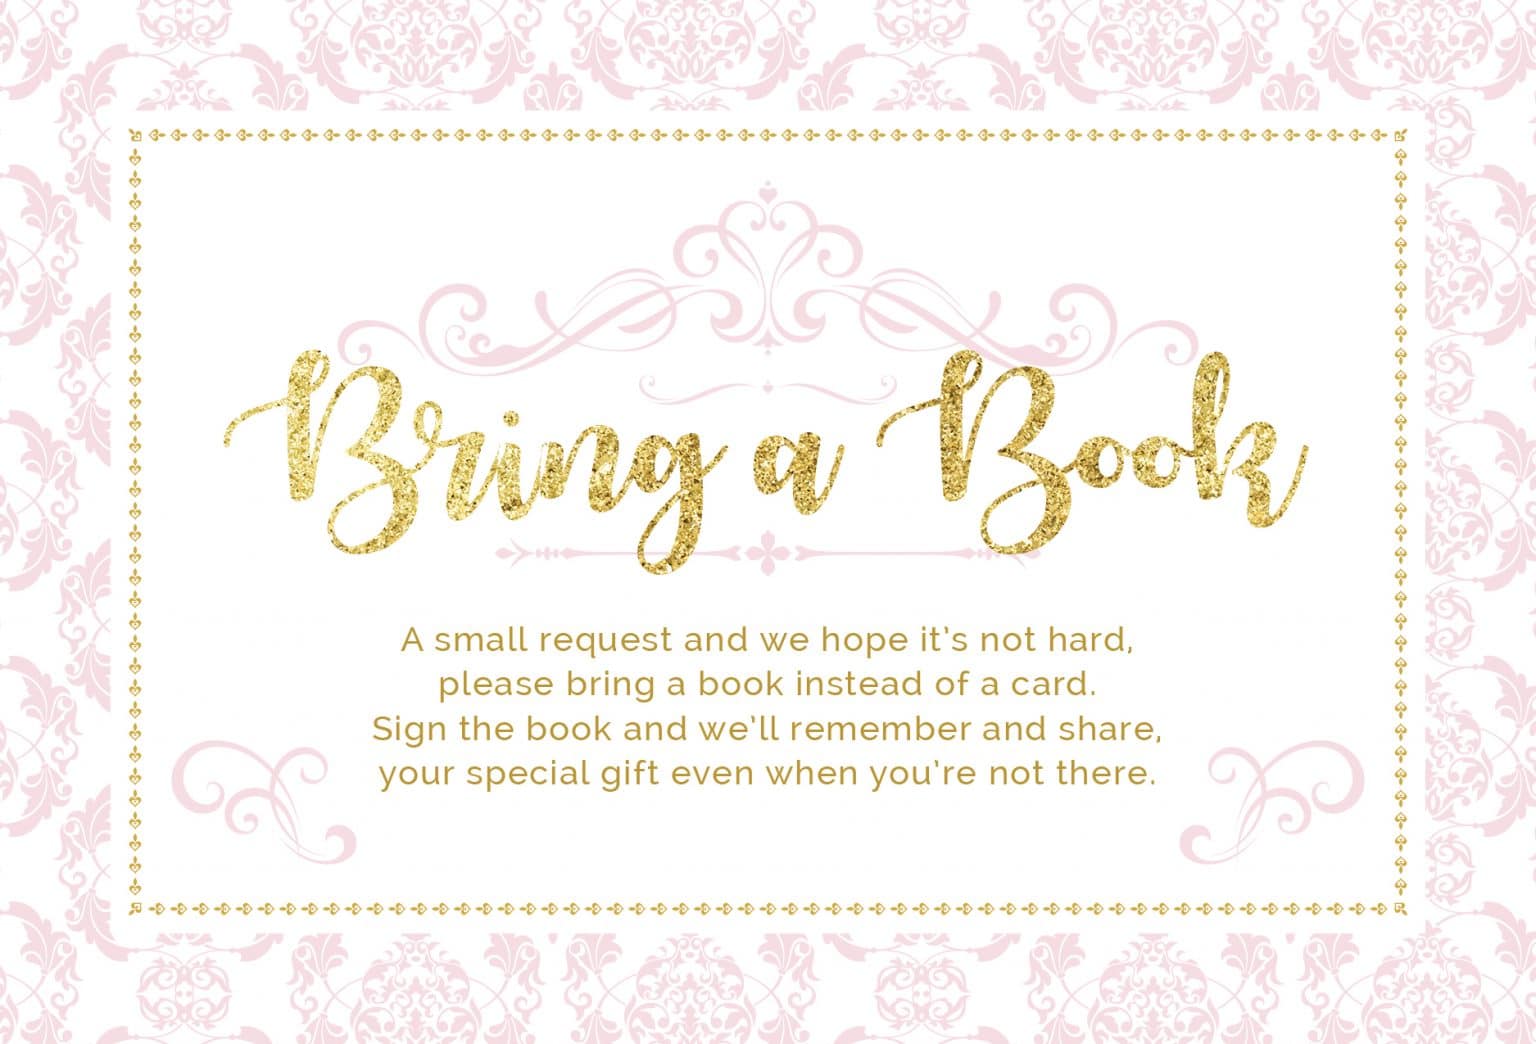 everything-you-need-to-plan-a-bring-a-book-instead-of-a-card-baby